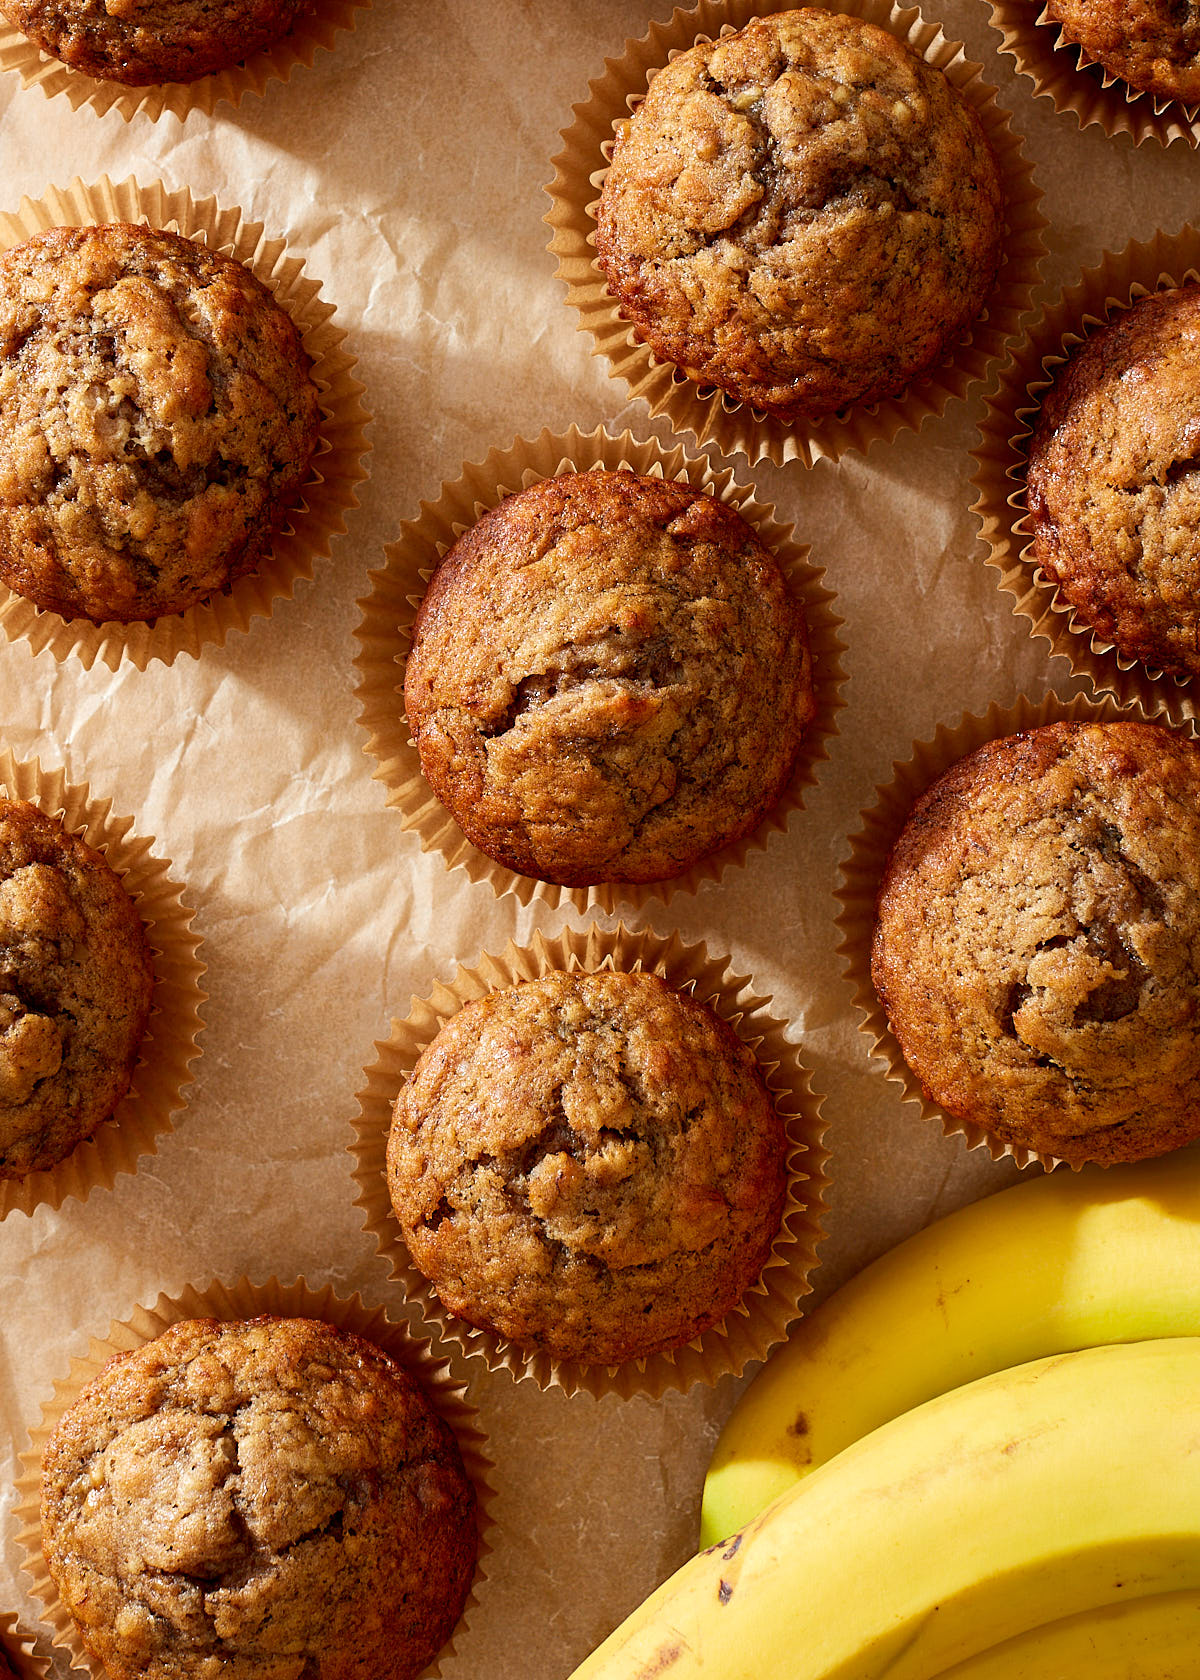 Simple banana muffins on natural parchment paper with a few yellow bananas.